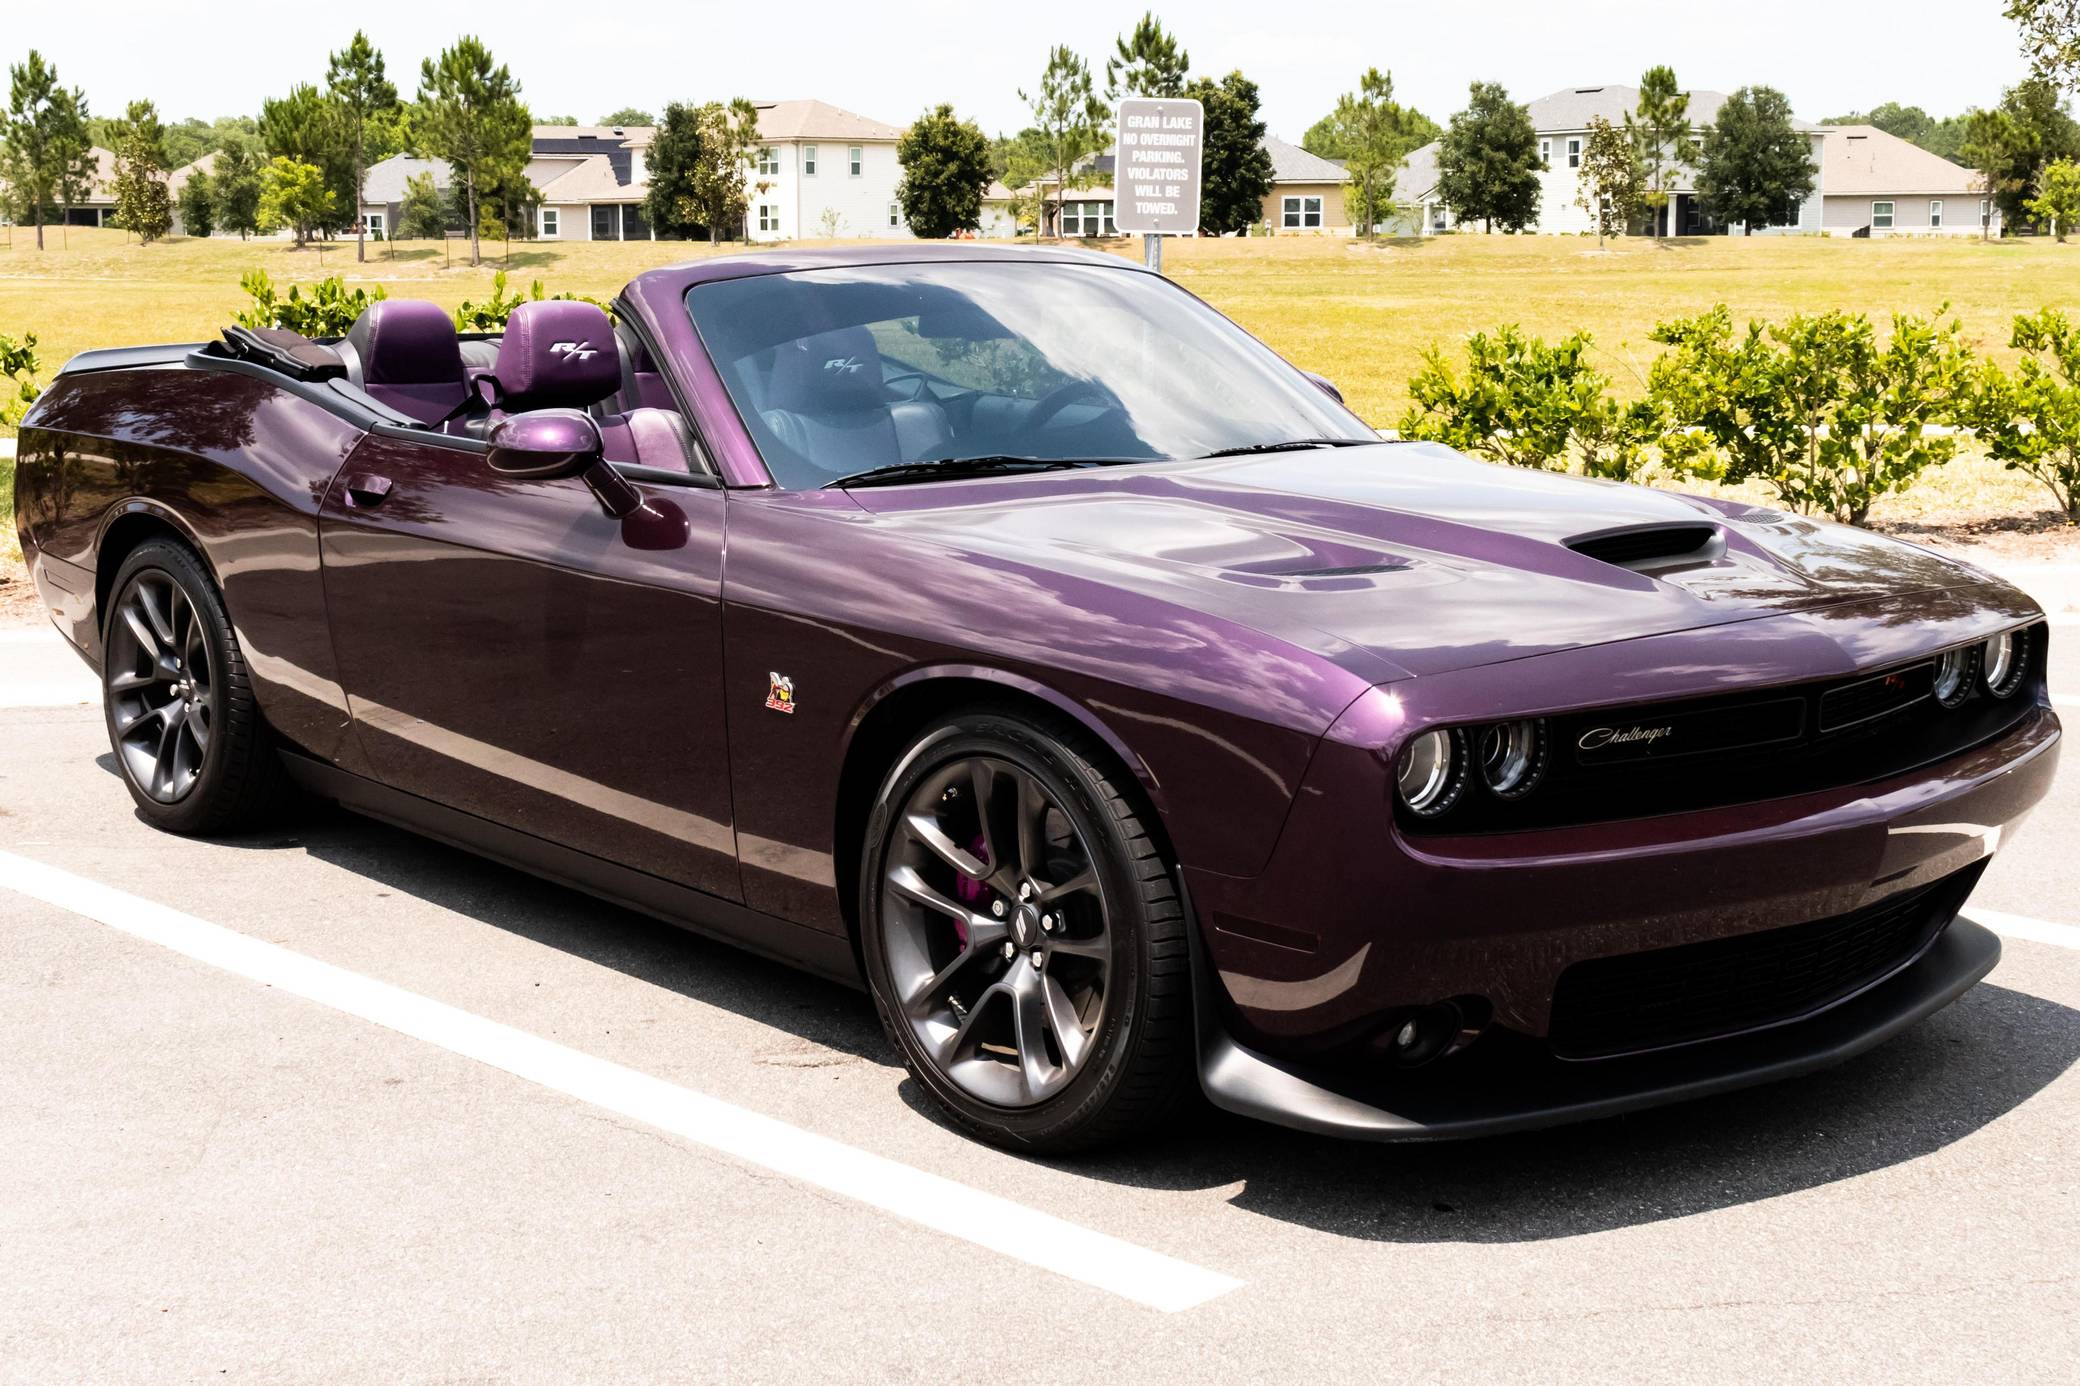 2020 Dodge Challenger R/T Scat Pack Convertible for Sale - Cars & Bids